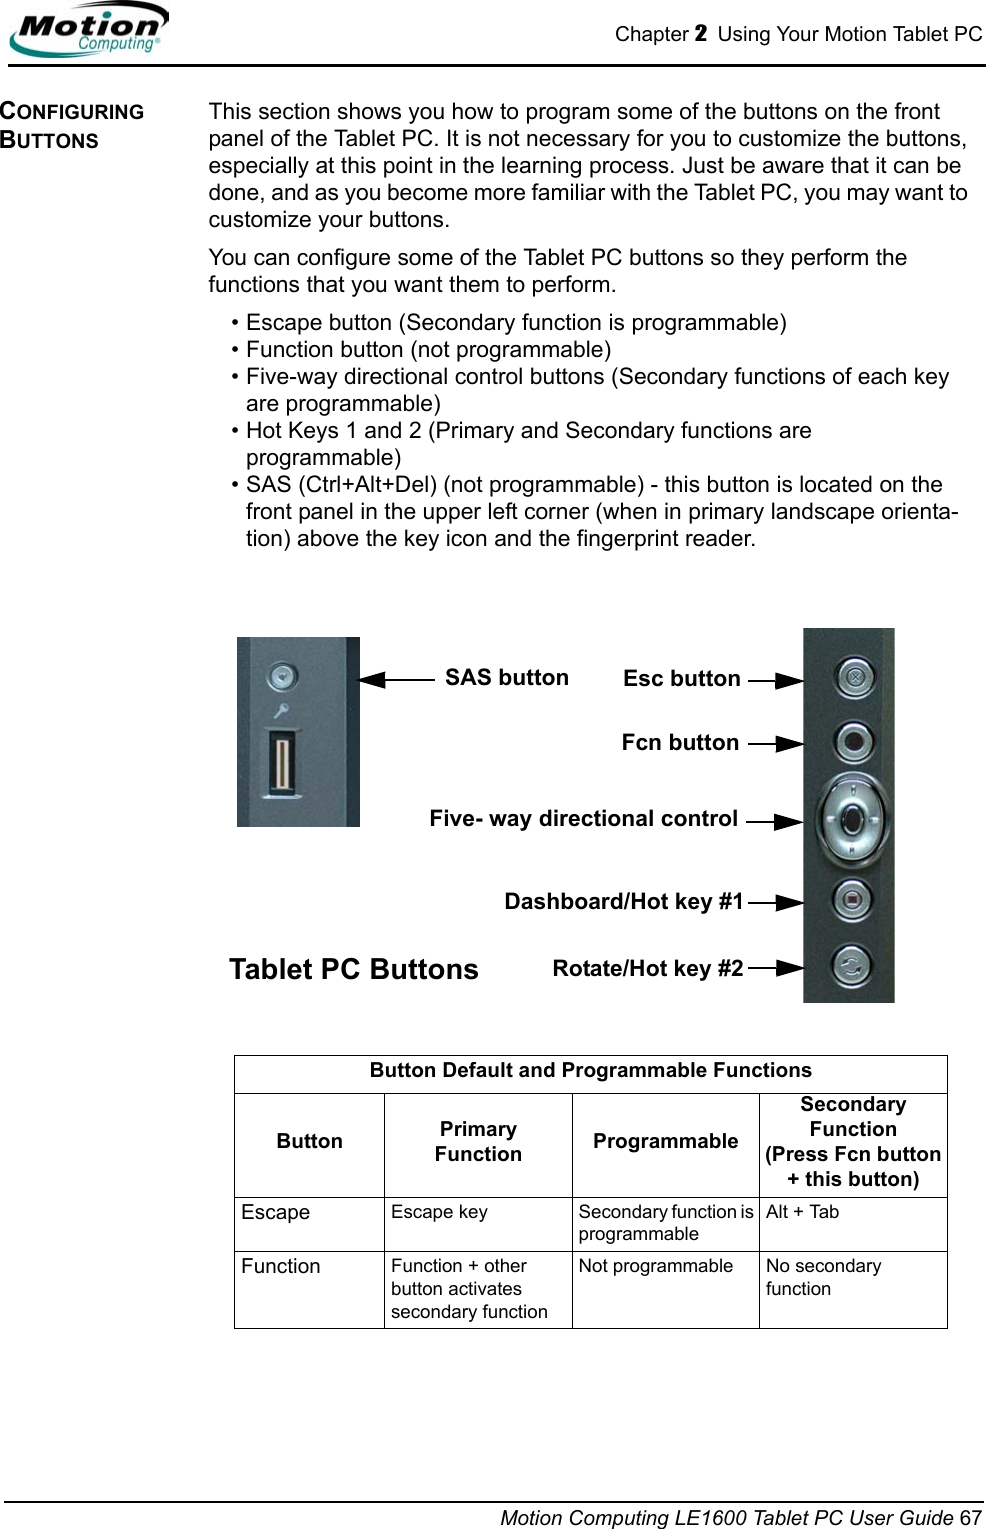 Chapter 2  Using Your Motion Tablet PCMotion Computing LE1600 Tablet PC User Guide 67CONFIGURING BUTTONSThis section shows you how to program some of the buttons on the front panel of the Tablet PC. It is not necessary for you to customize the buttons, especially at this point in the learning process. Just be aware that it can be done, and as you become more familiar with the Tablet PC, you may want to customize your buttons.You can configure some of the Tablet PC buttons so they perform the functions that you want them to perform.• Escape button (Secondary function is programmable)• Function button (not programmable)• Five-way directional control buttons (Secondary functions of each key are programmable)• Hot Keys 1 and 2 (Primary and Secondary functions are programmable)• SAS (Ctrl+Alt+Del) (not programmable) - this button is located on the front panel in the upper left corner (when in primary landscape orienta-tion) above the key icon and the fingerprint reader.Button Default and Programmable FunctionsButton PrimaryFunction ProgrammableSecondary Function (Press Fcn button + this button)Escape  Escape key Secondary function is programmableAlt + TabFunction  Function + other button activates secondary functionNot programmable No secondary functionEsc buttonFcn buttonFive- way directional controlDashboard/Hot key #1Rotate/Hot key #2SAS buttonTablet PC Buttons